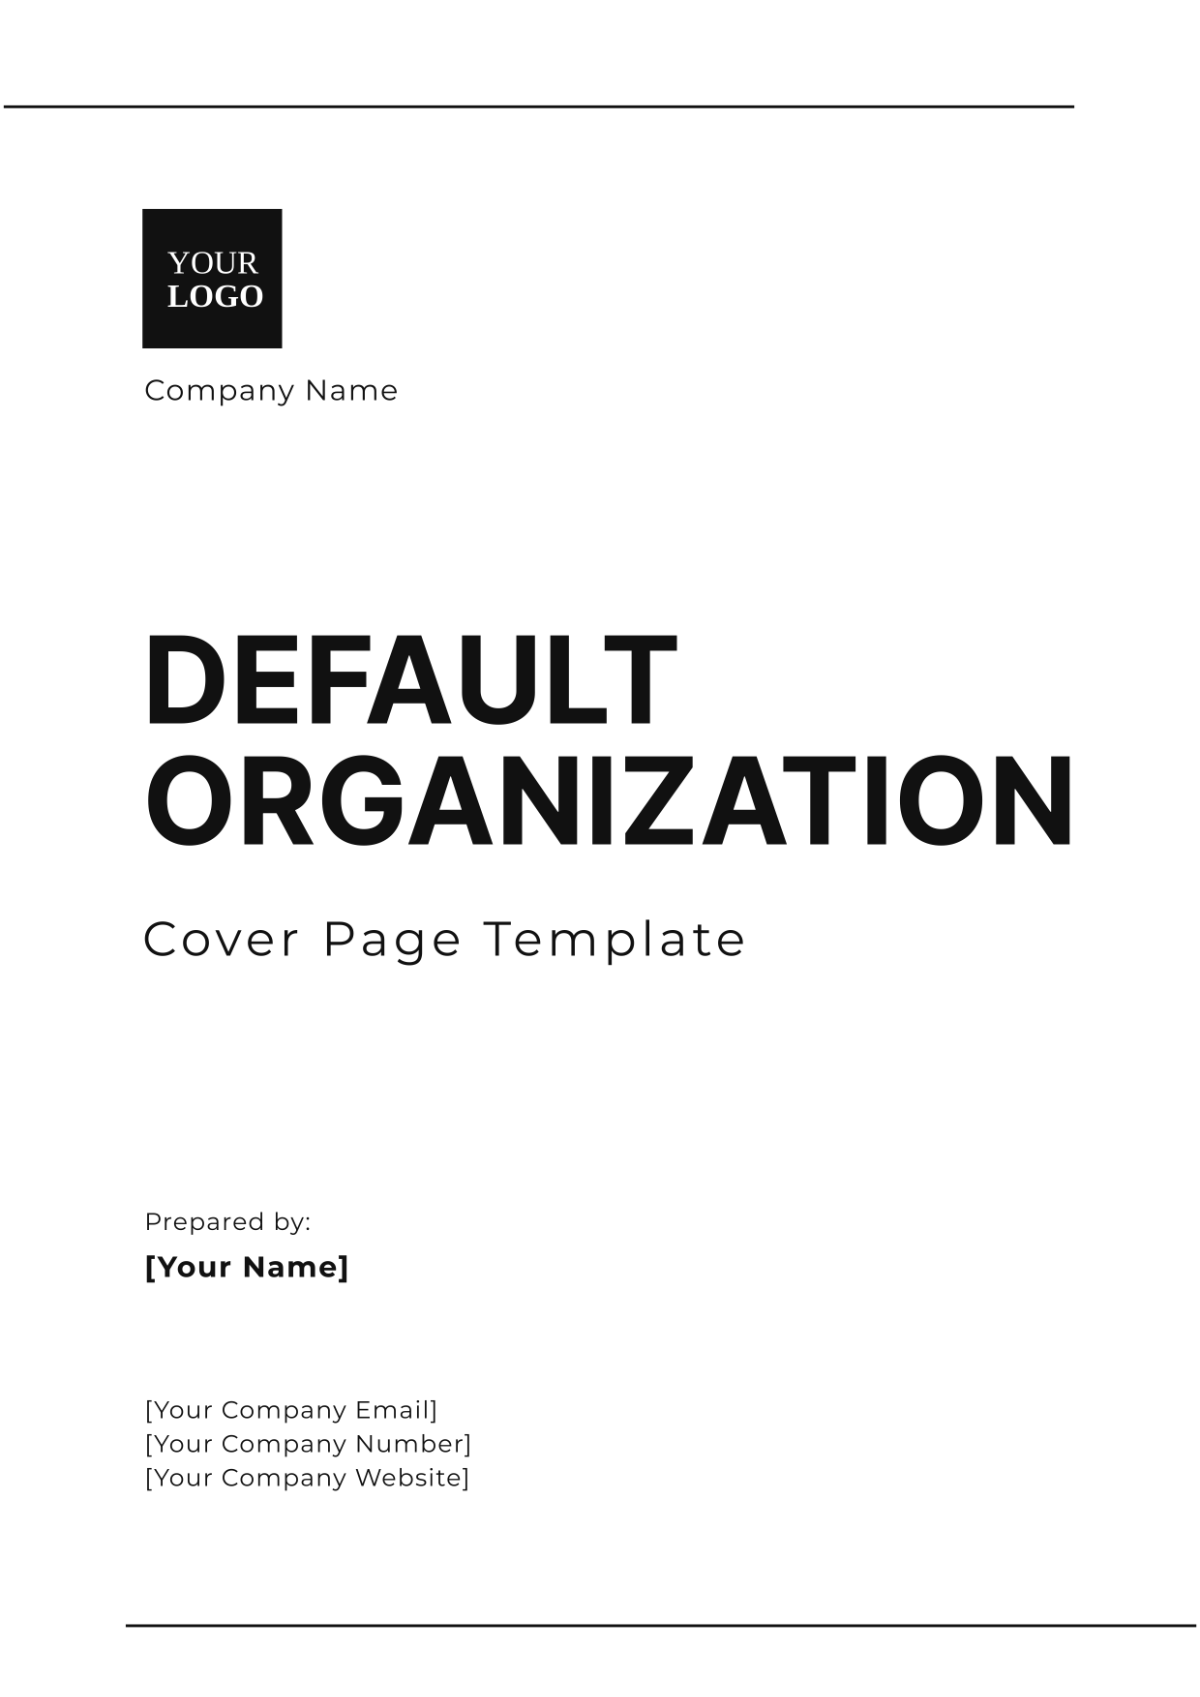 Default Organization Cover Page